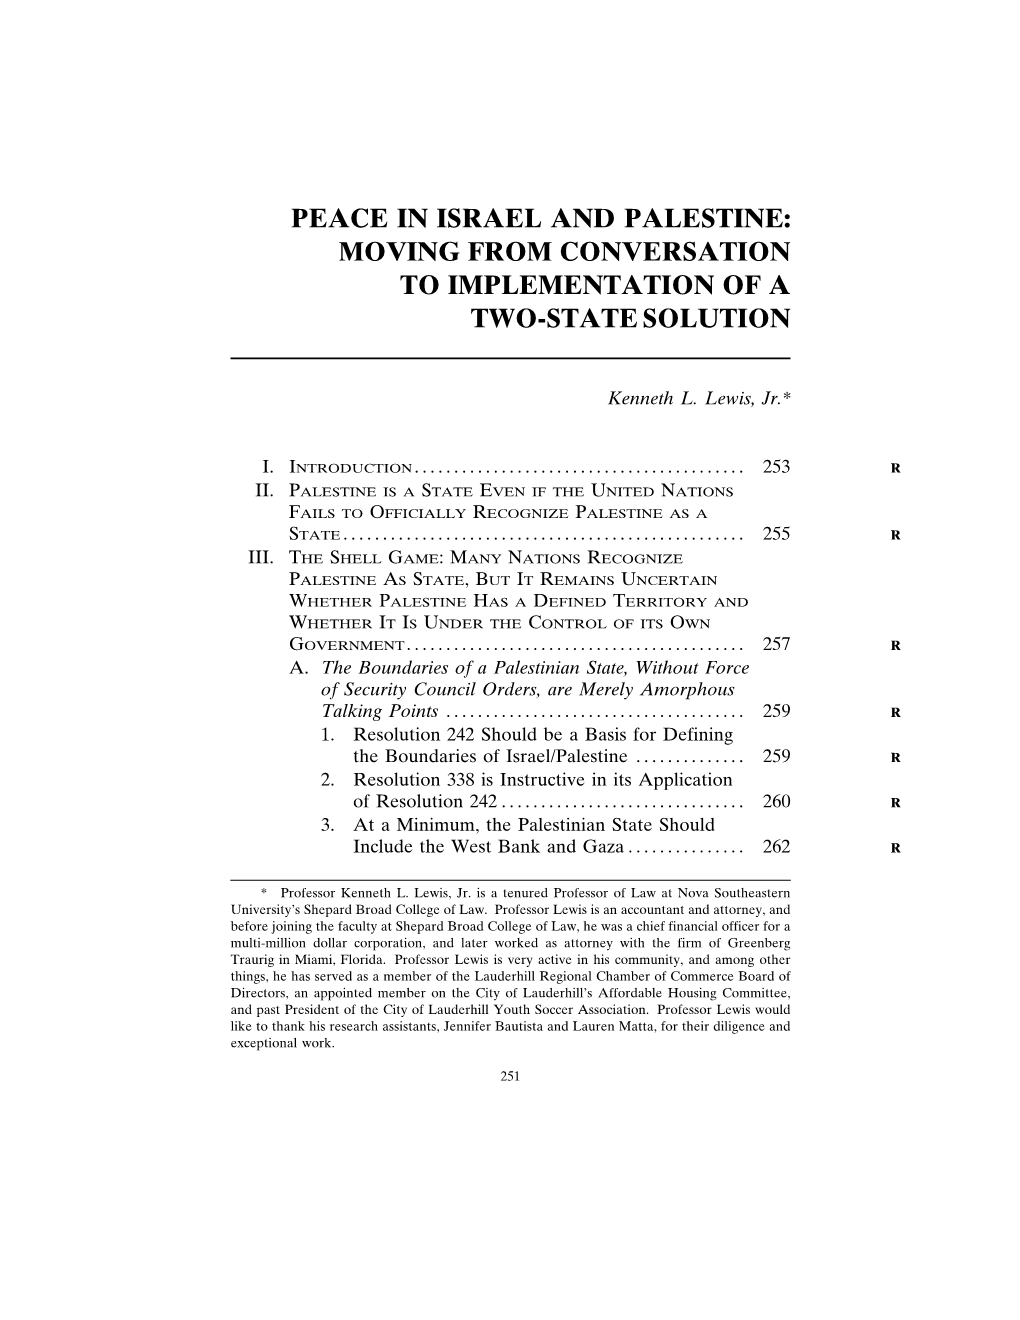 Peace in Israel and Palestine: Moving from Conversation to Implementation of a Two-State Solution